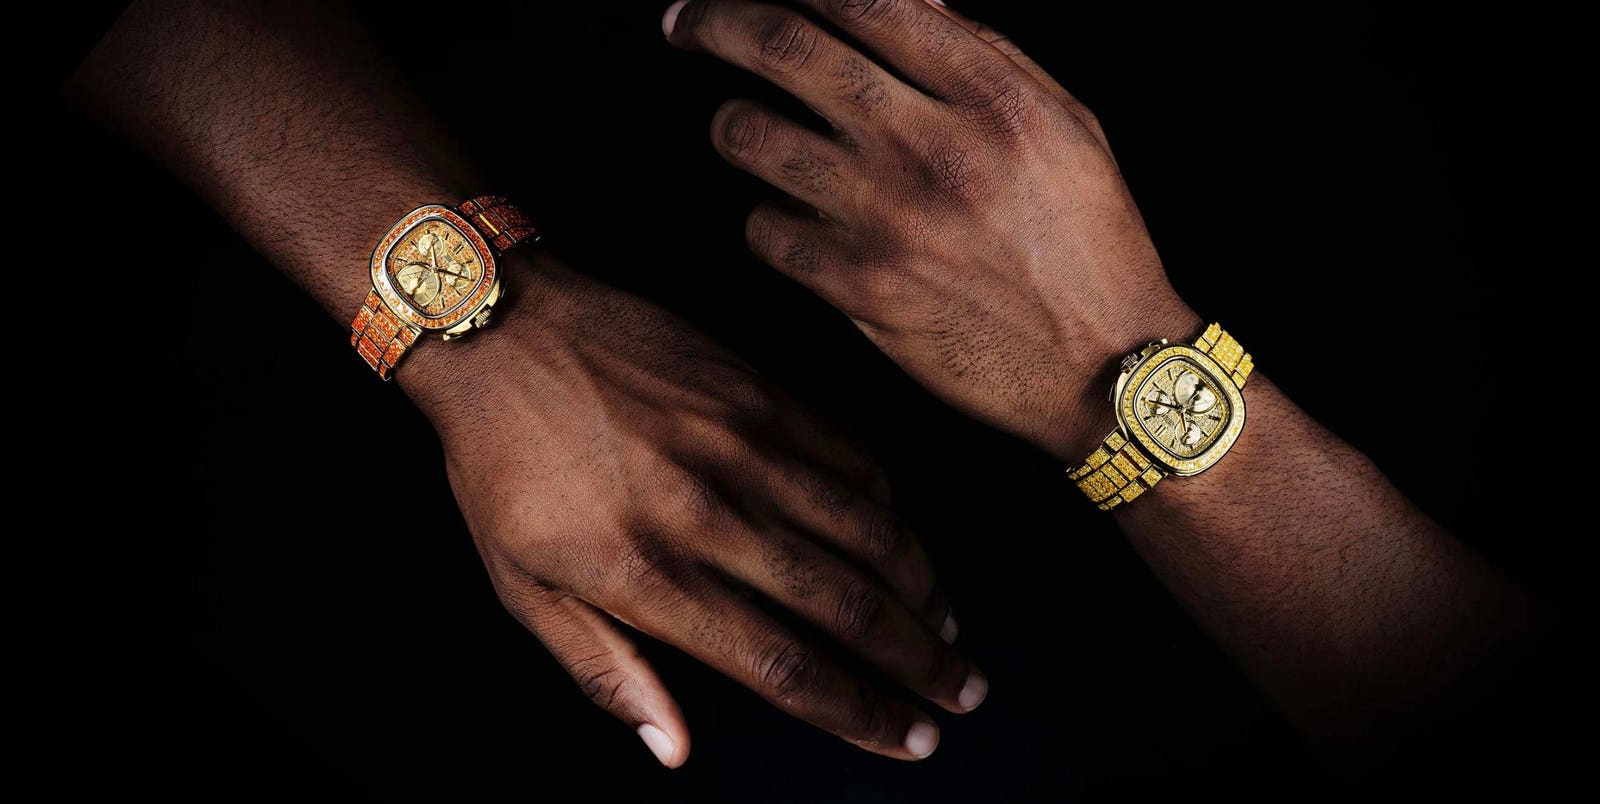 JBW Reimagines Timepieces With A Collection Based On Jewelry Design